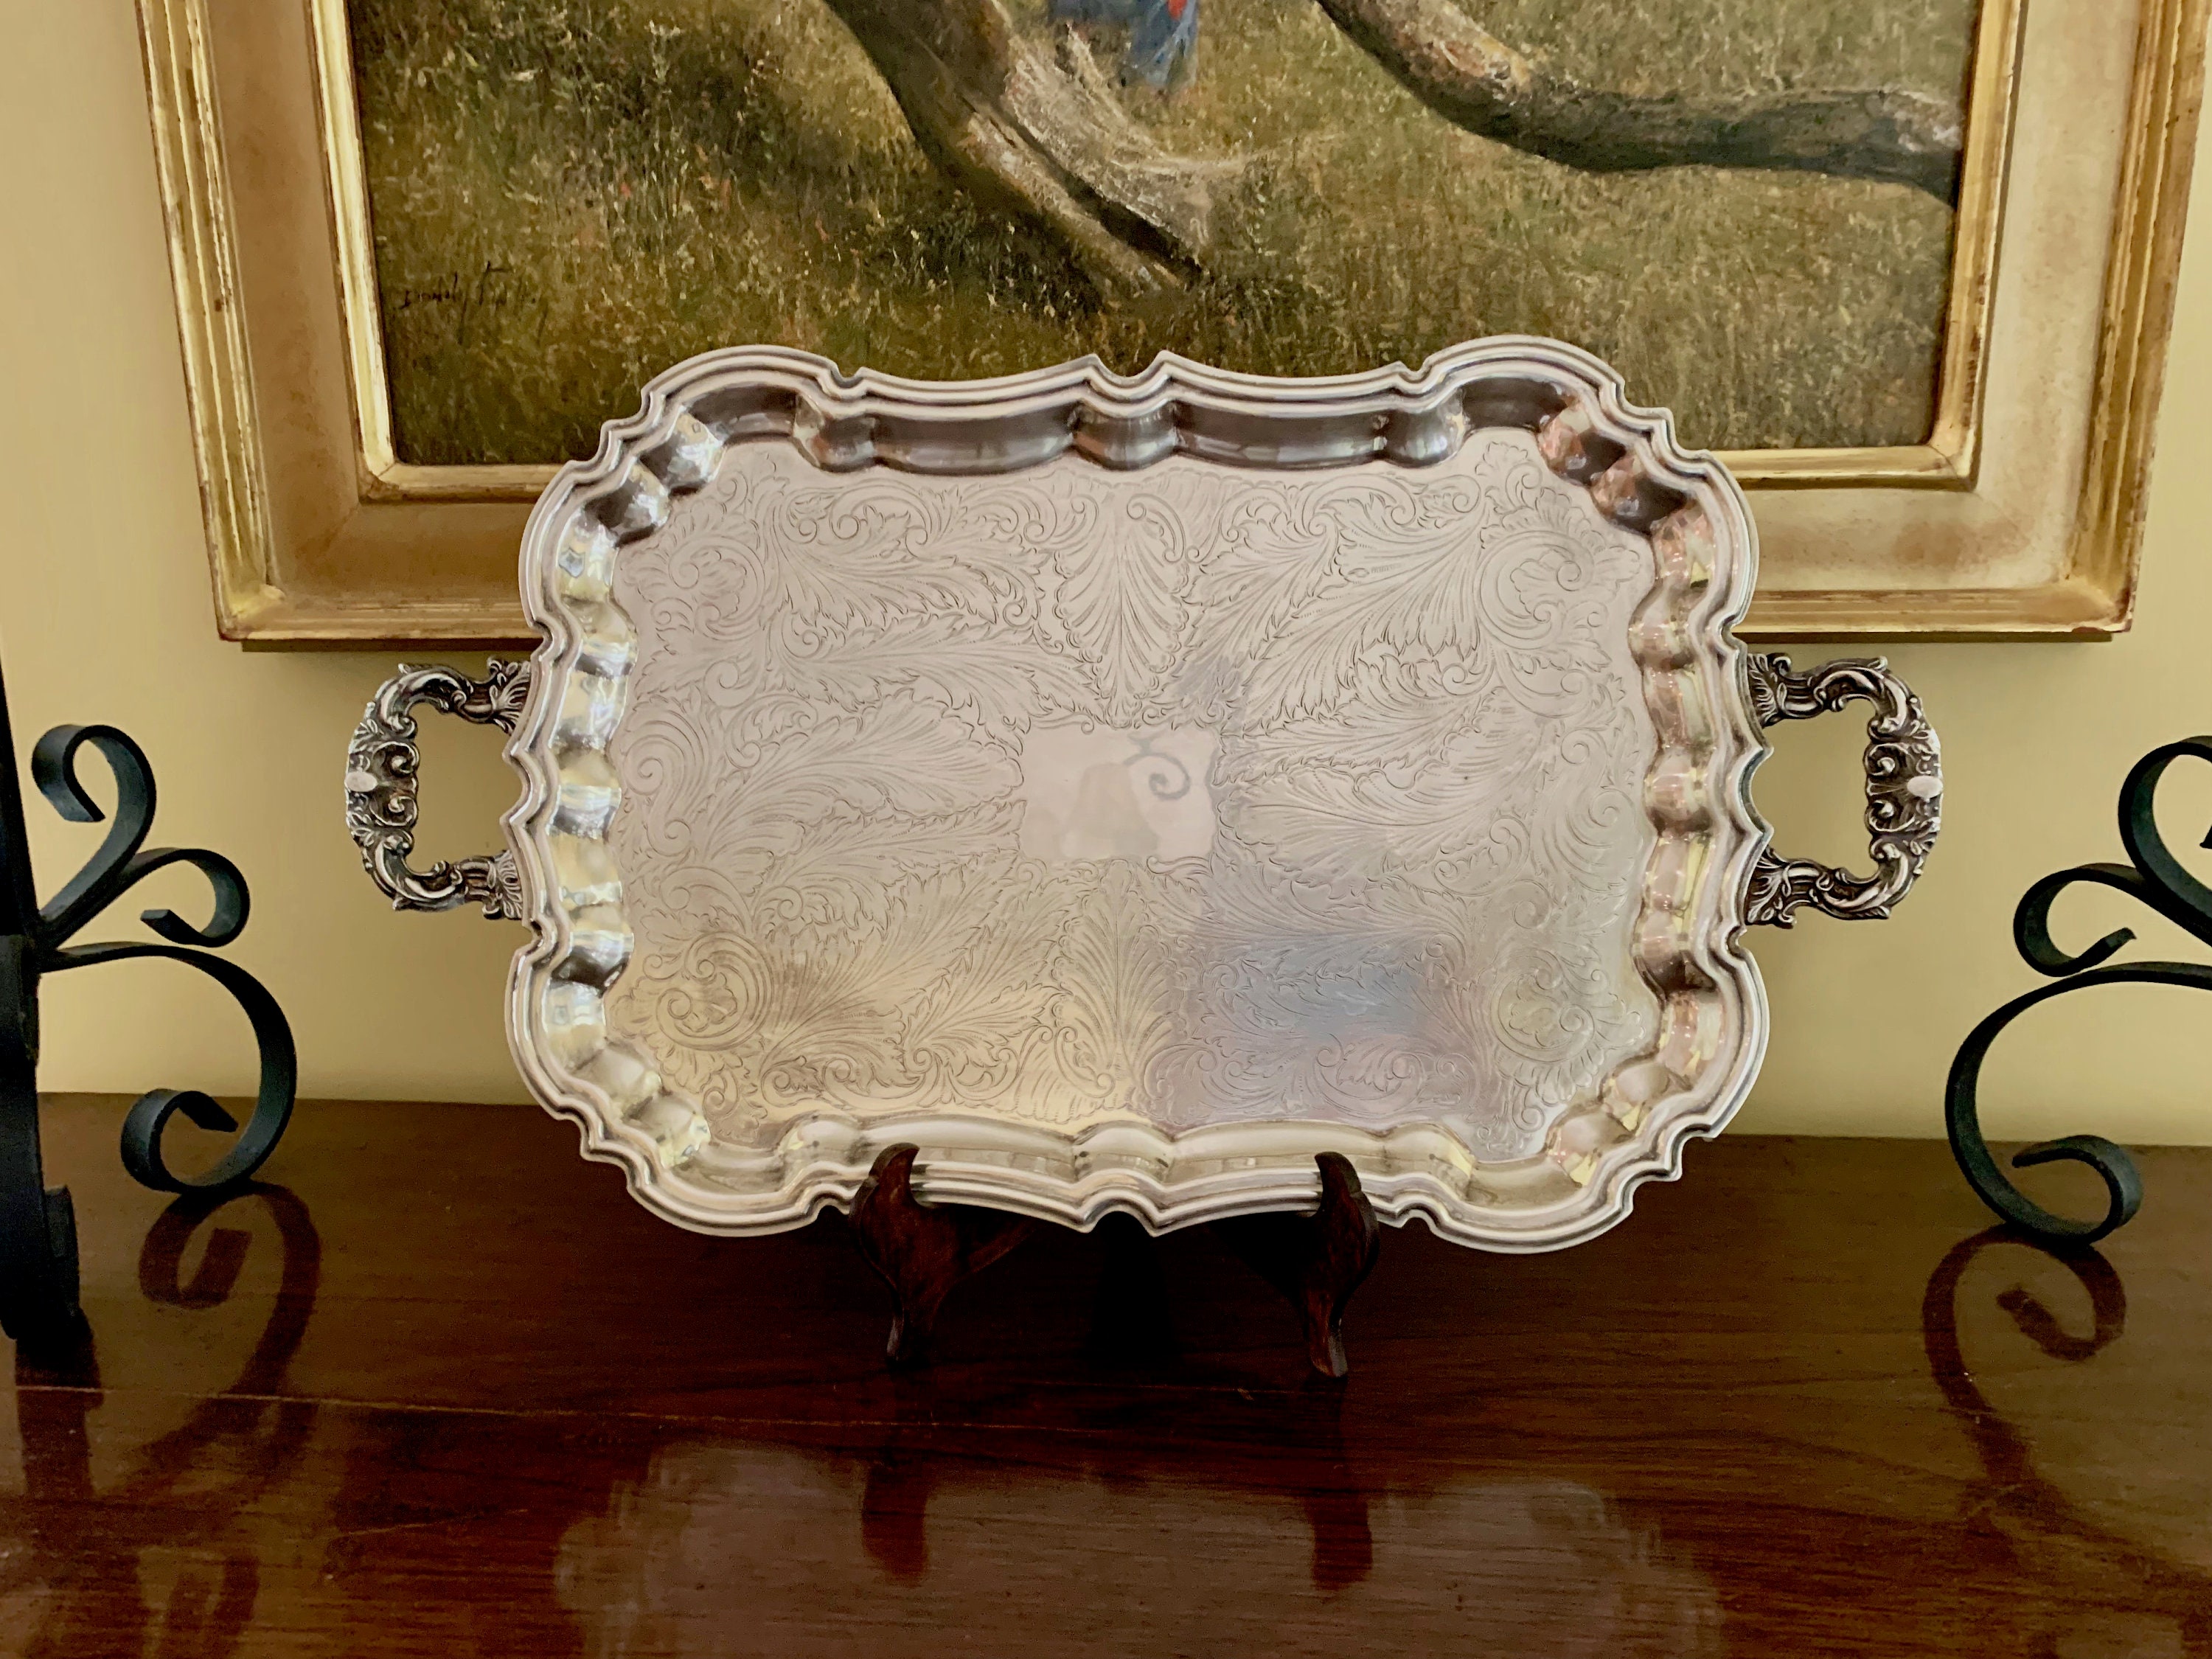 Silver Plate Butler's Tray, Leonard Silver Plate Footed Waiter's Tray with  Handles, Silver Barware Tray, Chased Scroll Design, Wedding Gift